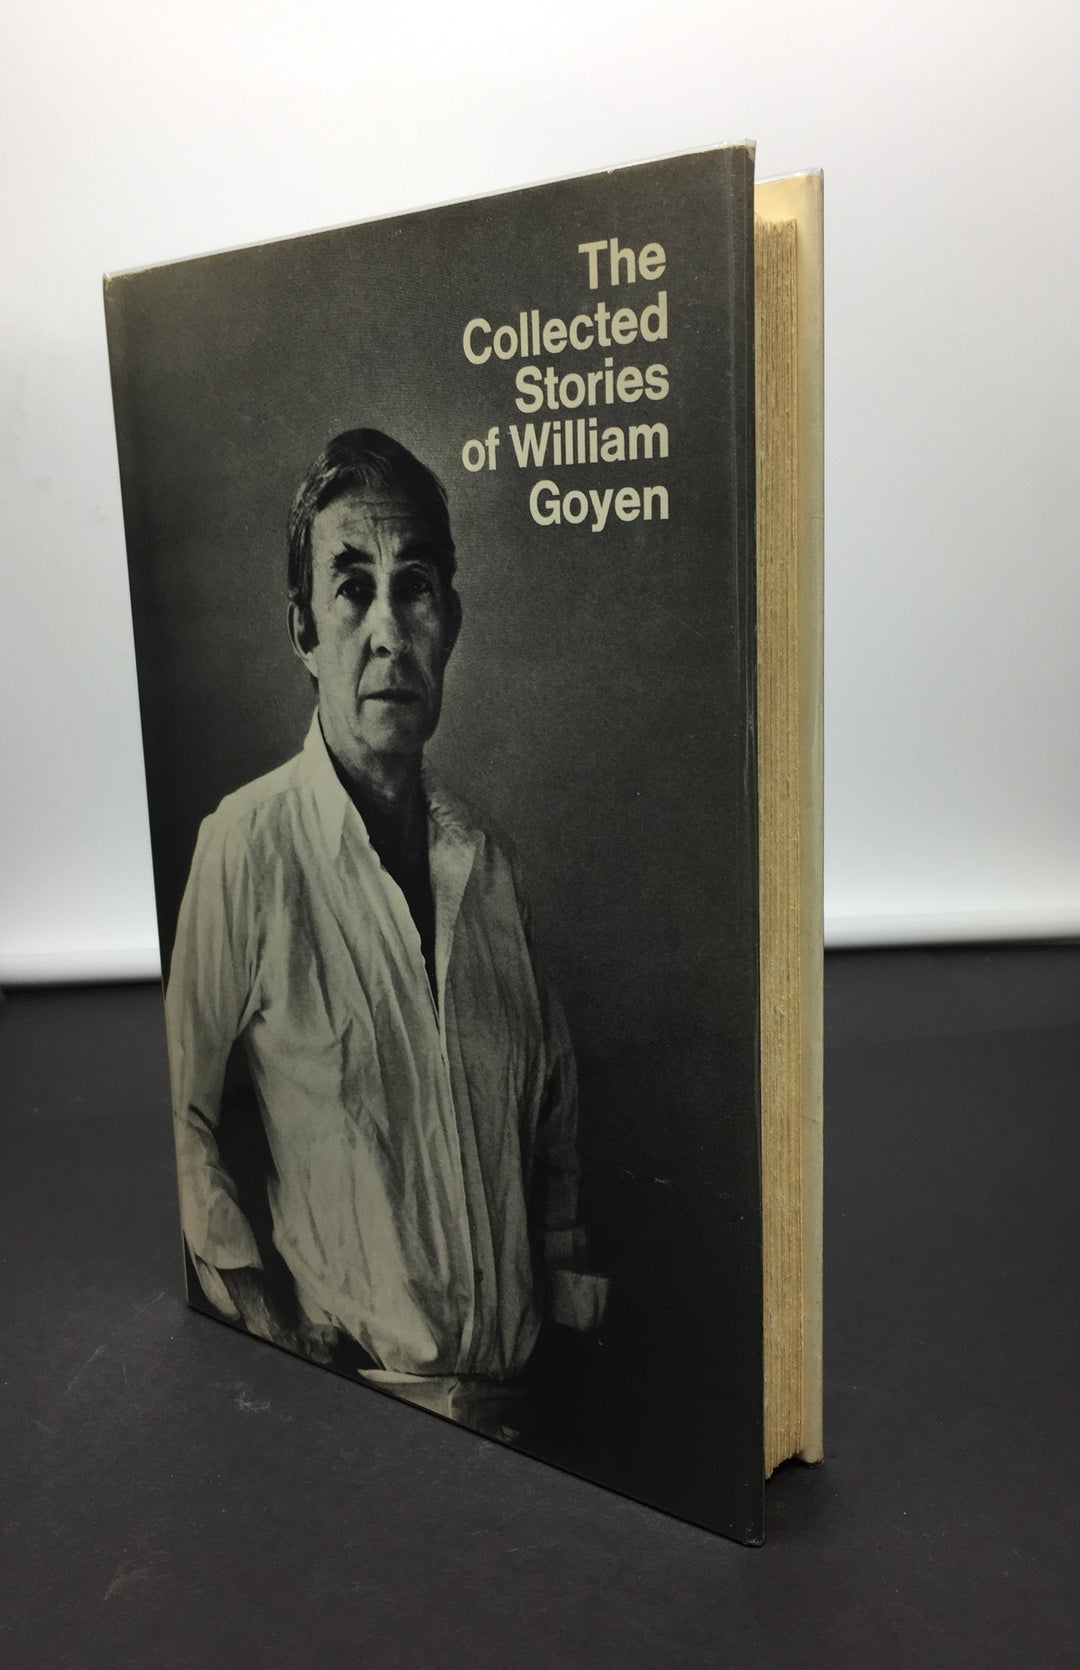 Goyen, William - The Collected Stories of William Goyen | back cover